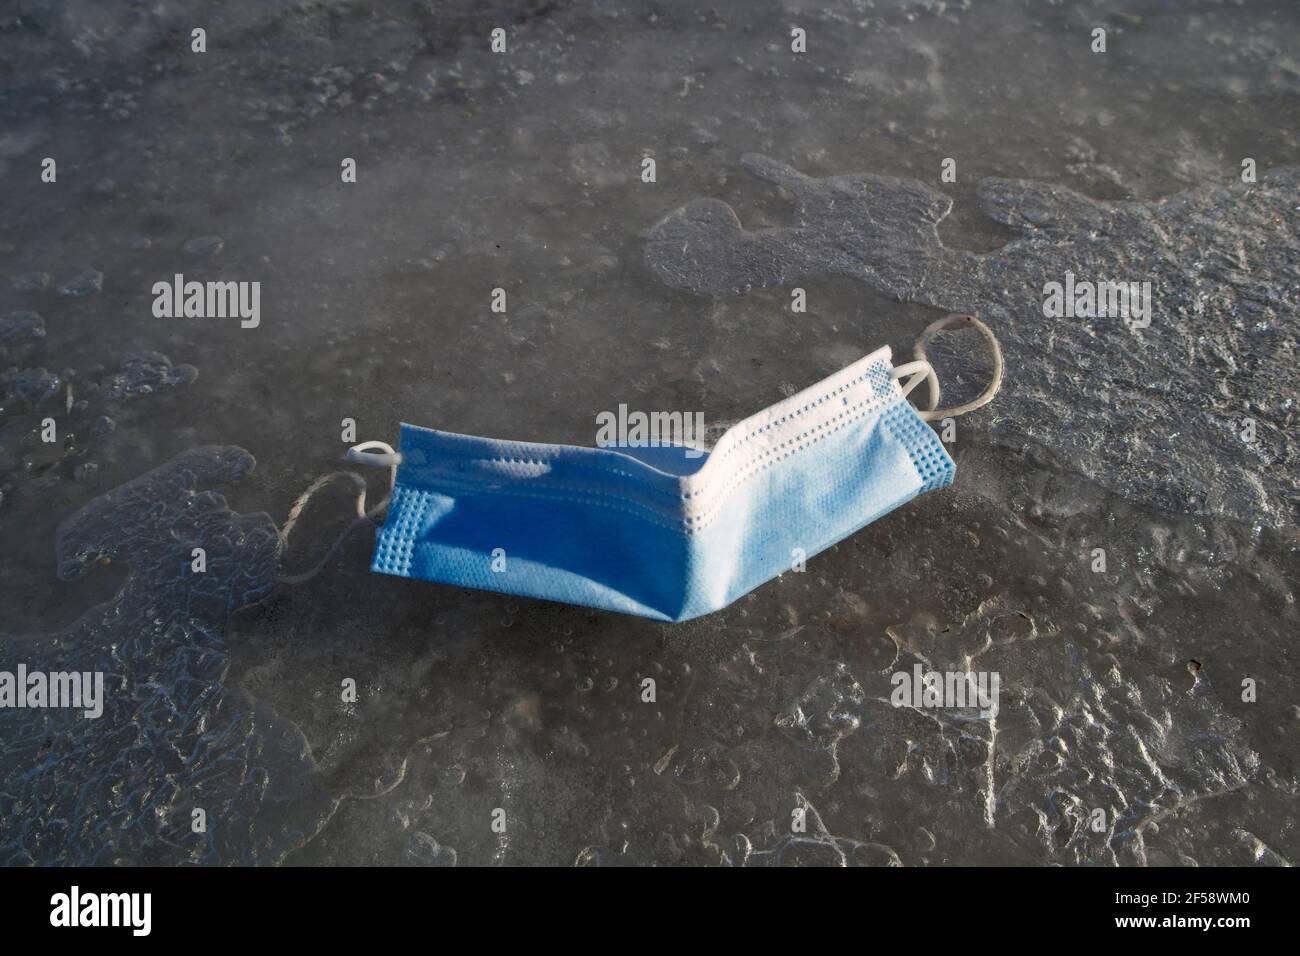 used coronavirus respiratory infection protection mask on ground in frozen puddle Stock Photo